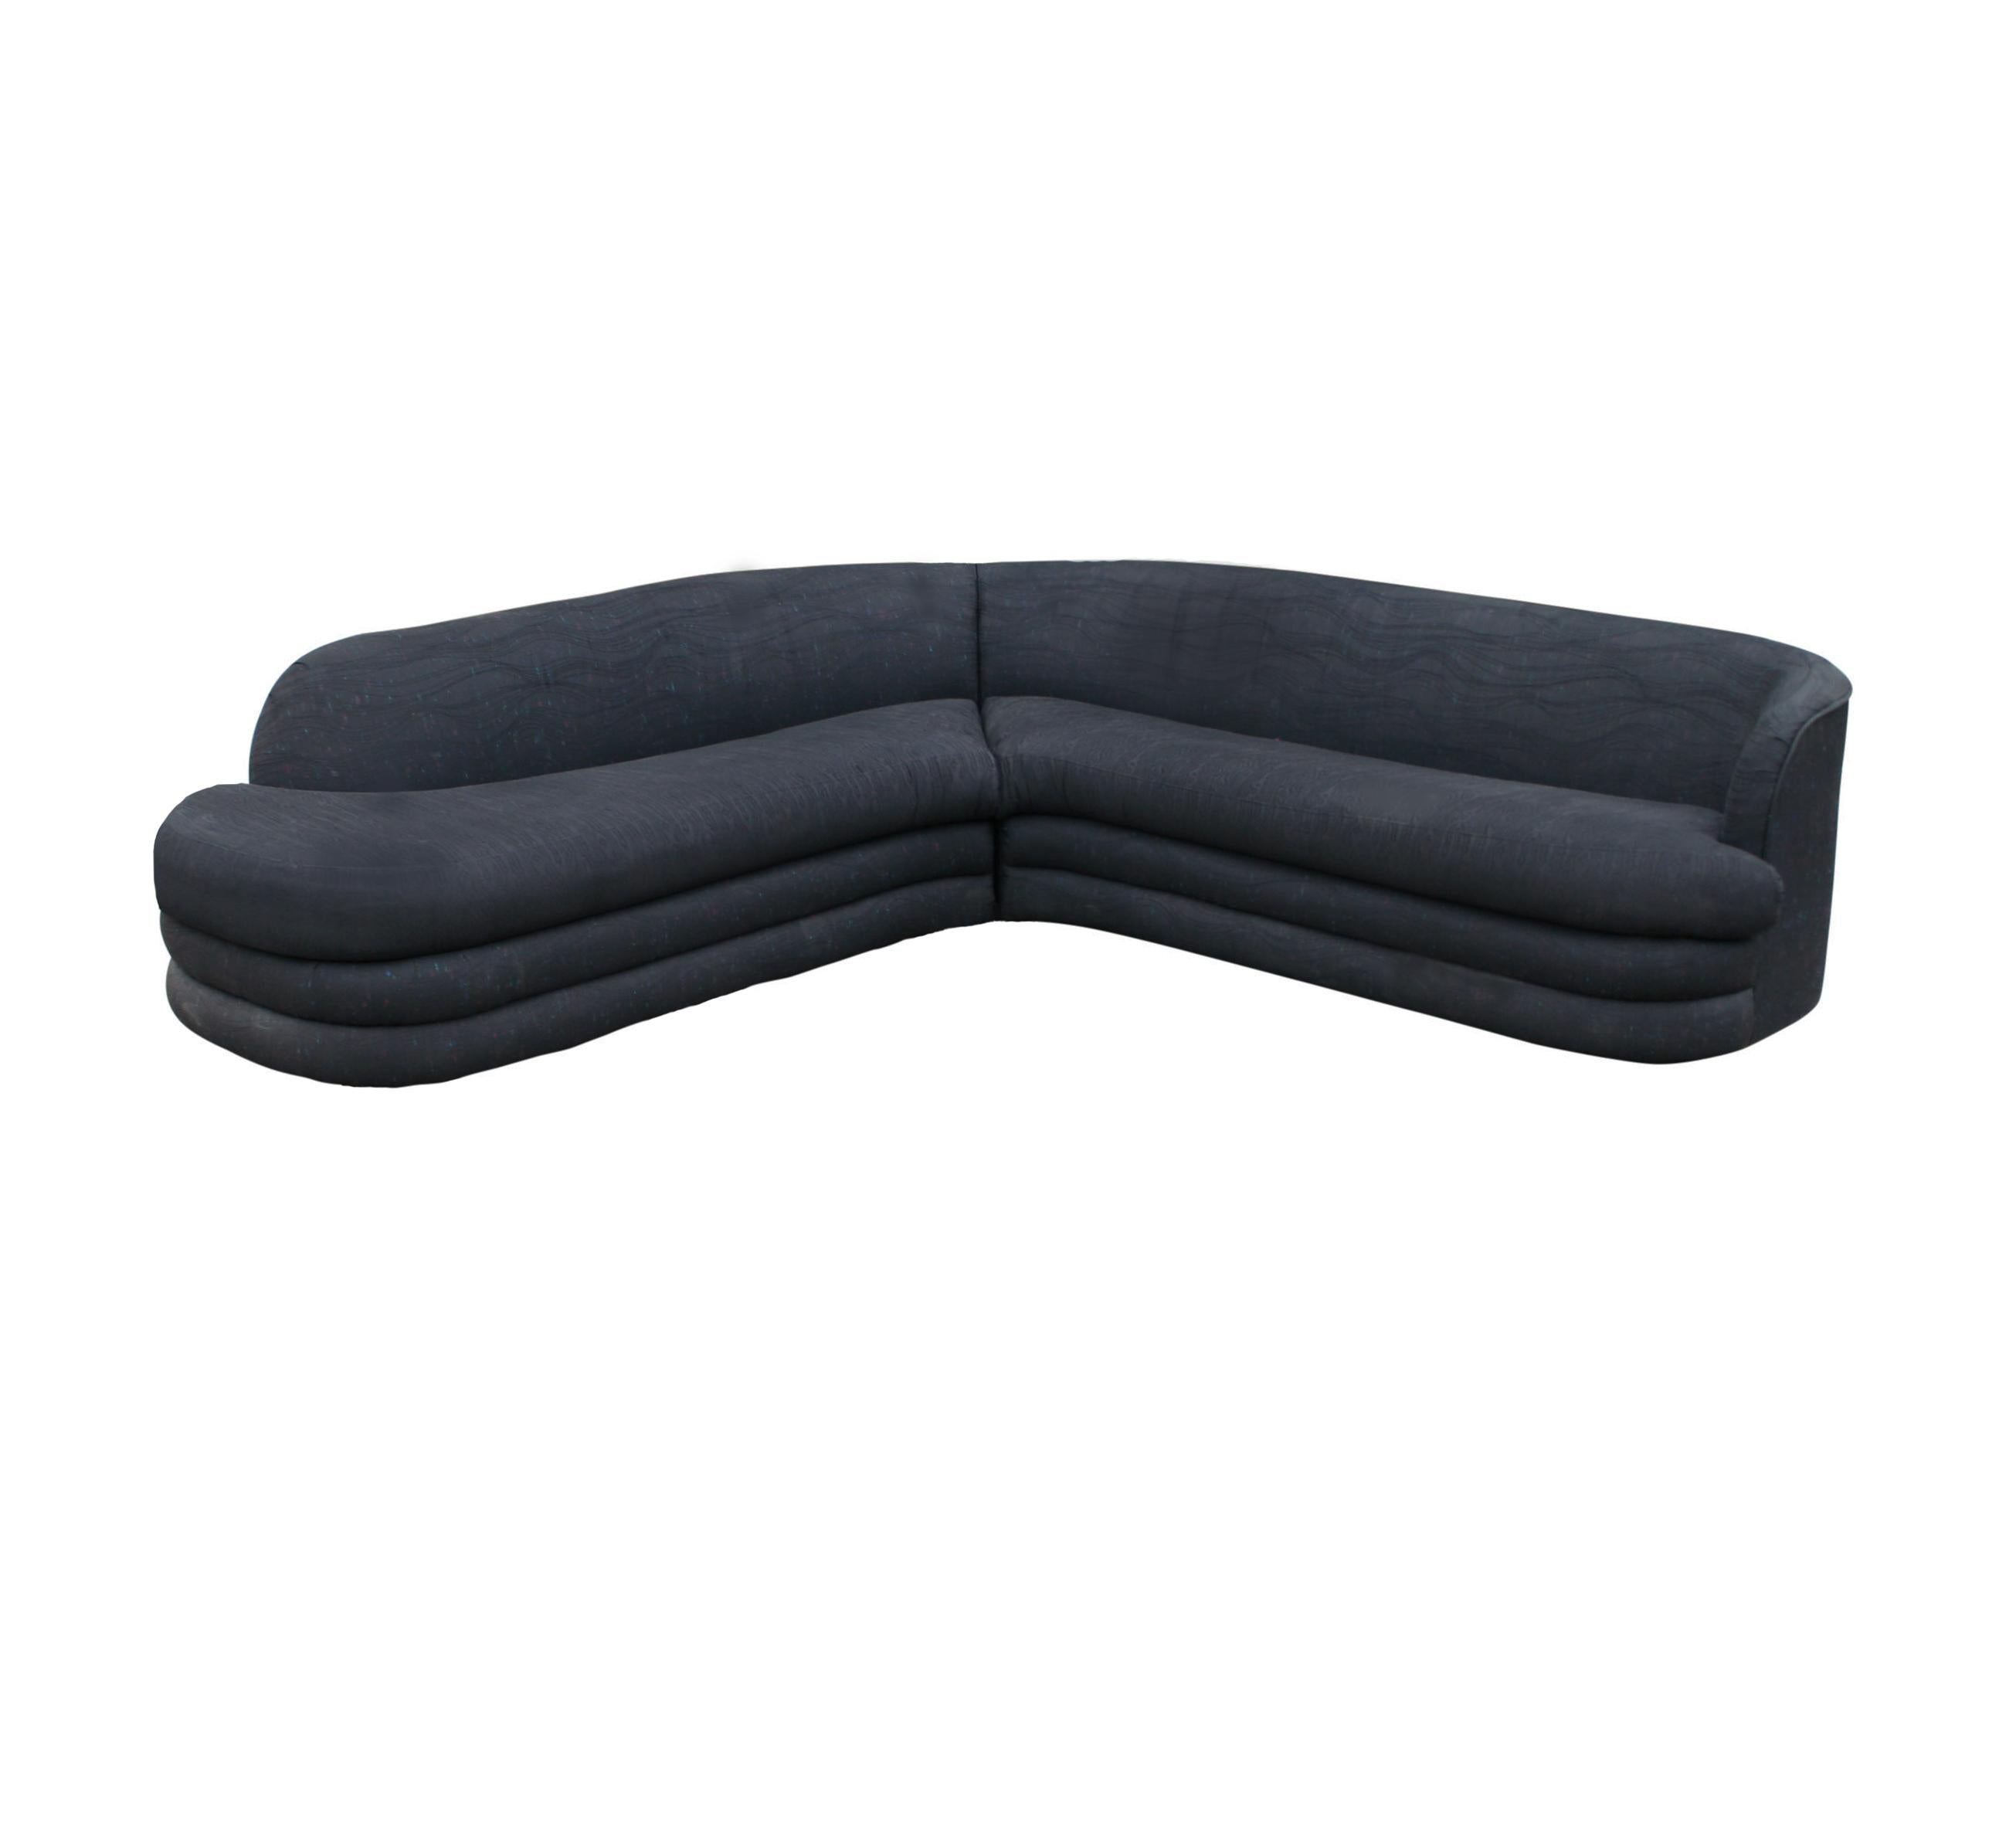 Post-Modern Mid-Century Modern Curved Serpentine Sectional Sofa by Adrian Pearsall Art Deco